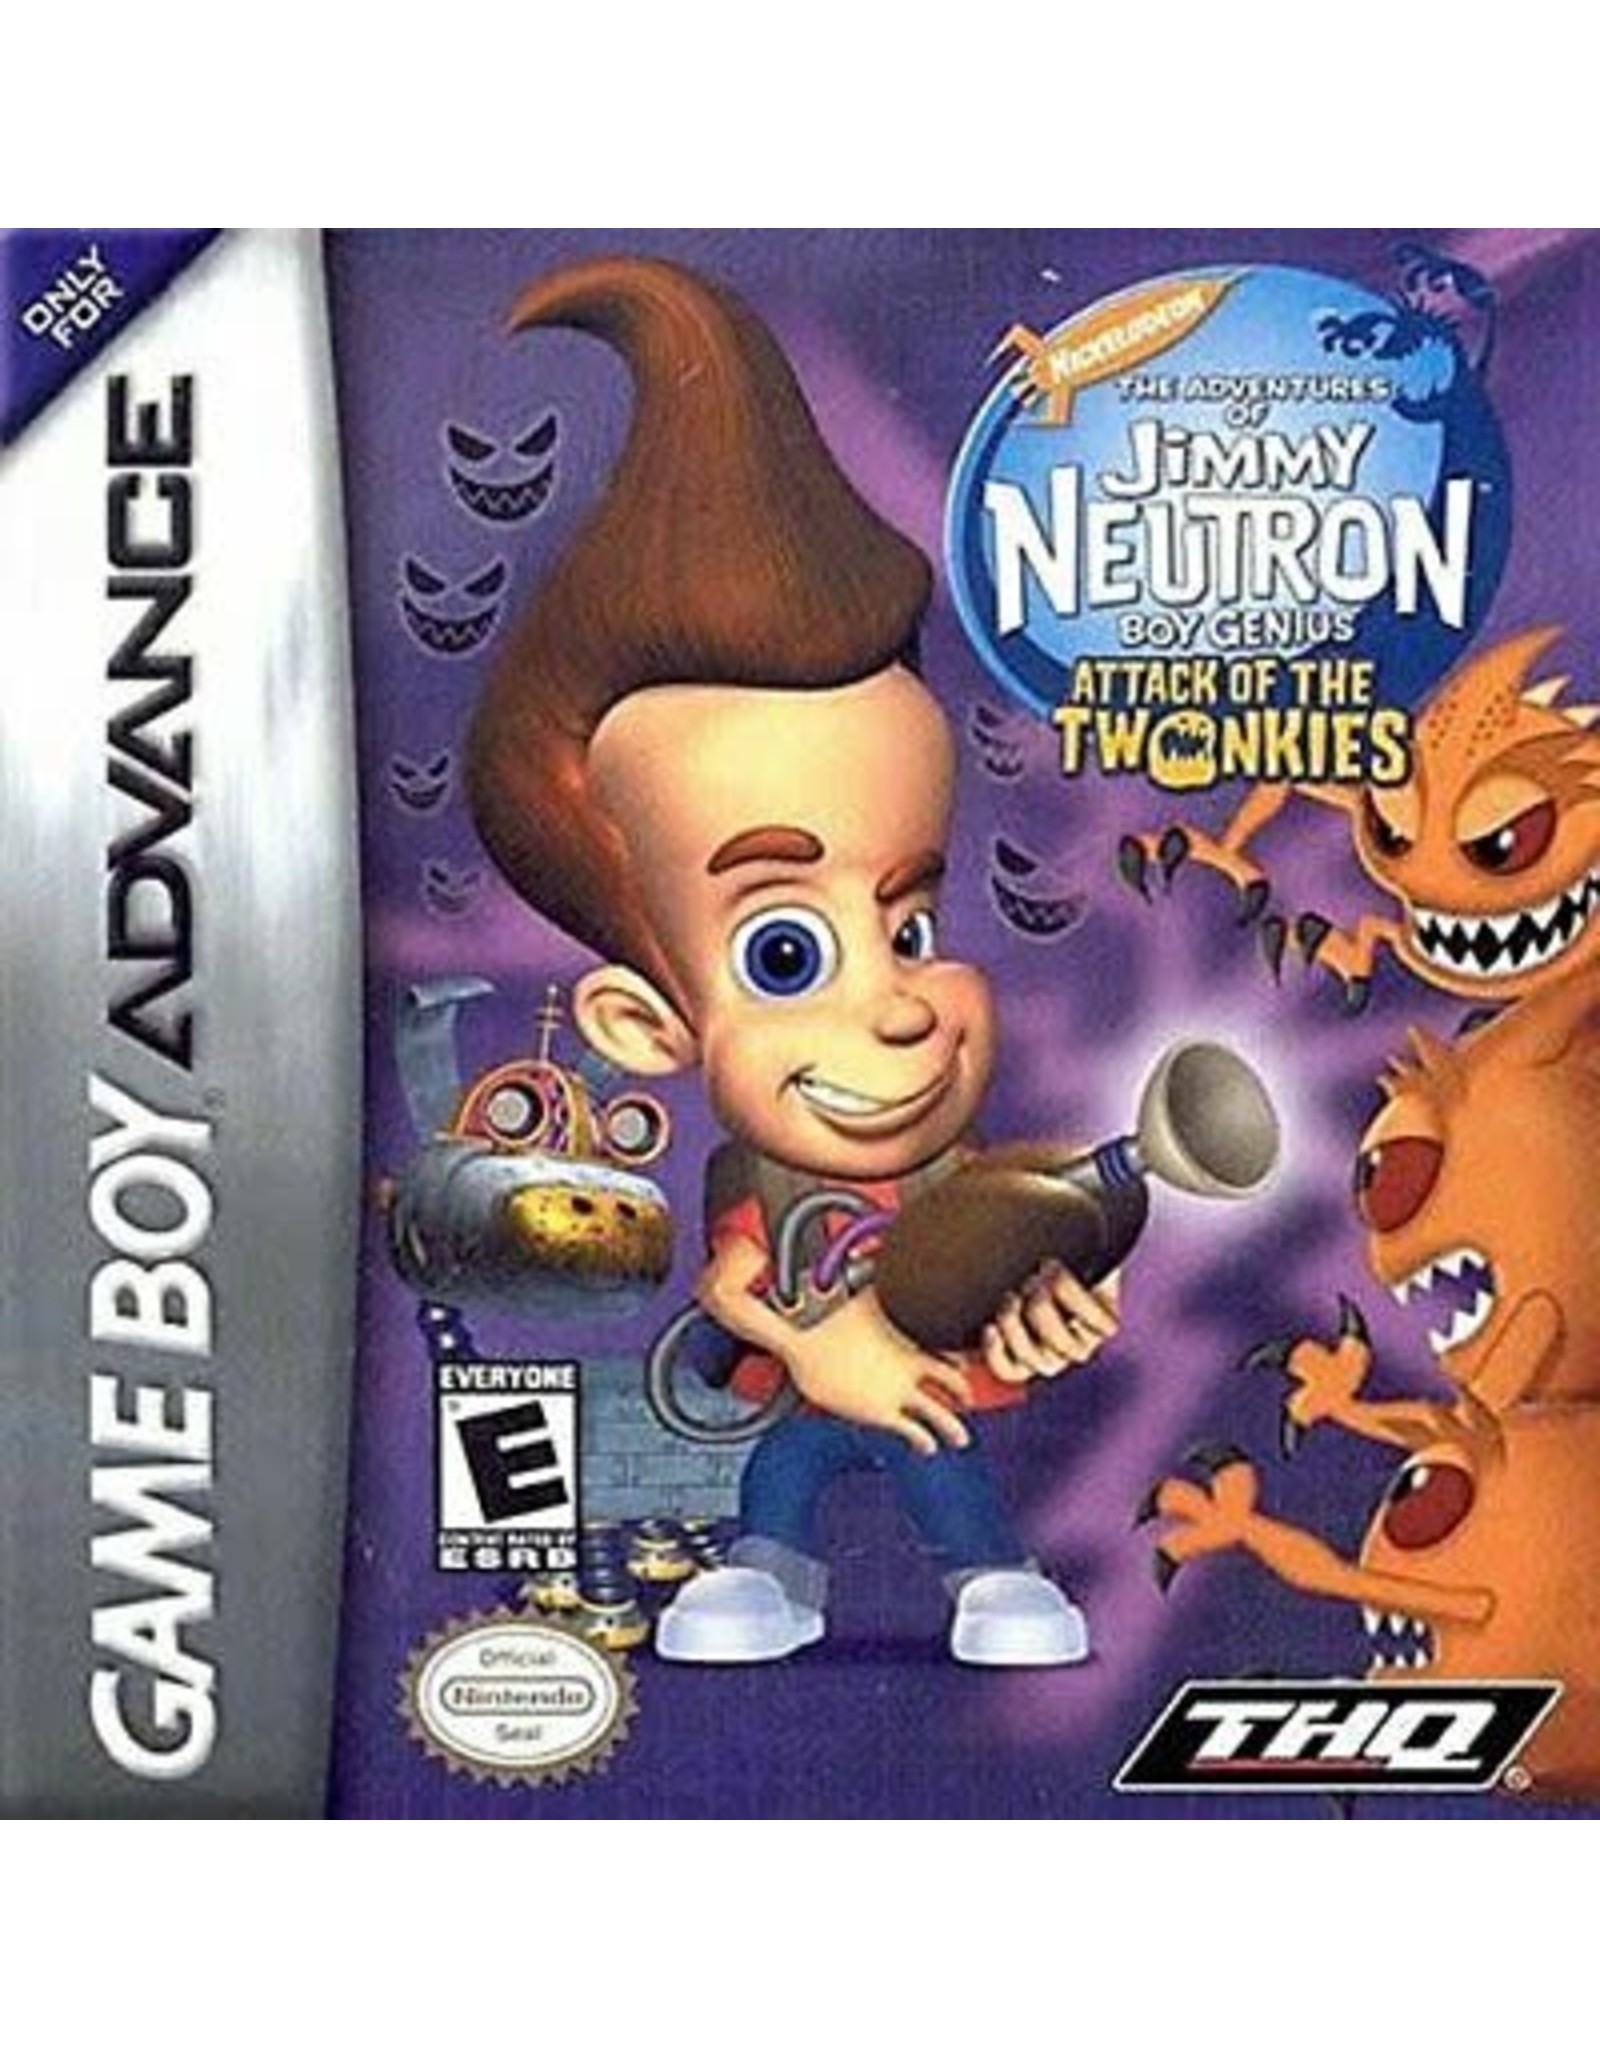 Game Boy Advance Jimmy Neutron Attack of the Twonkies (Used, Cart Only)